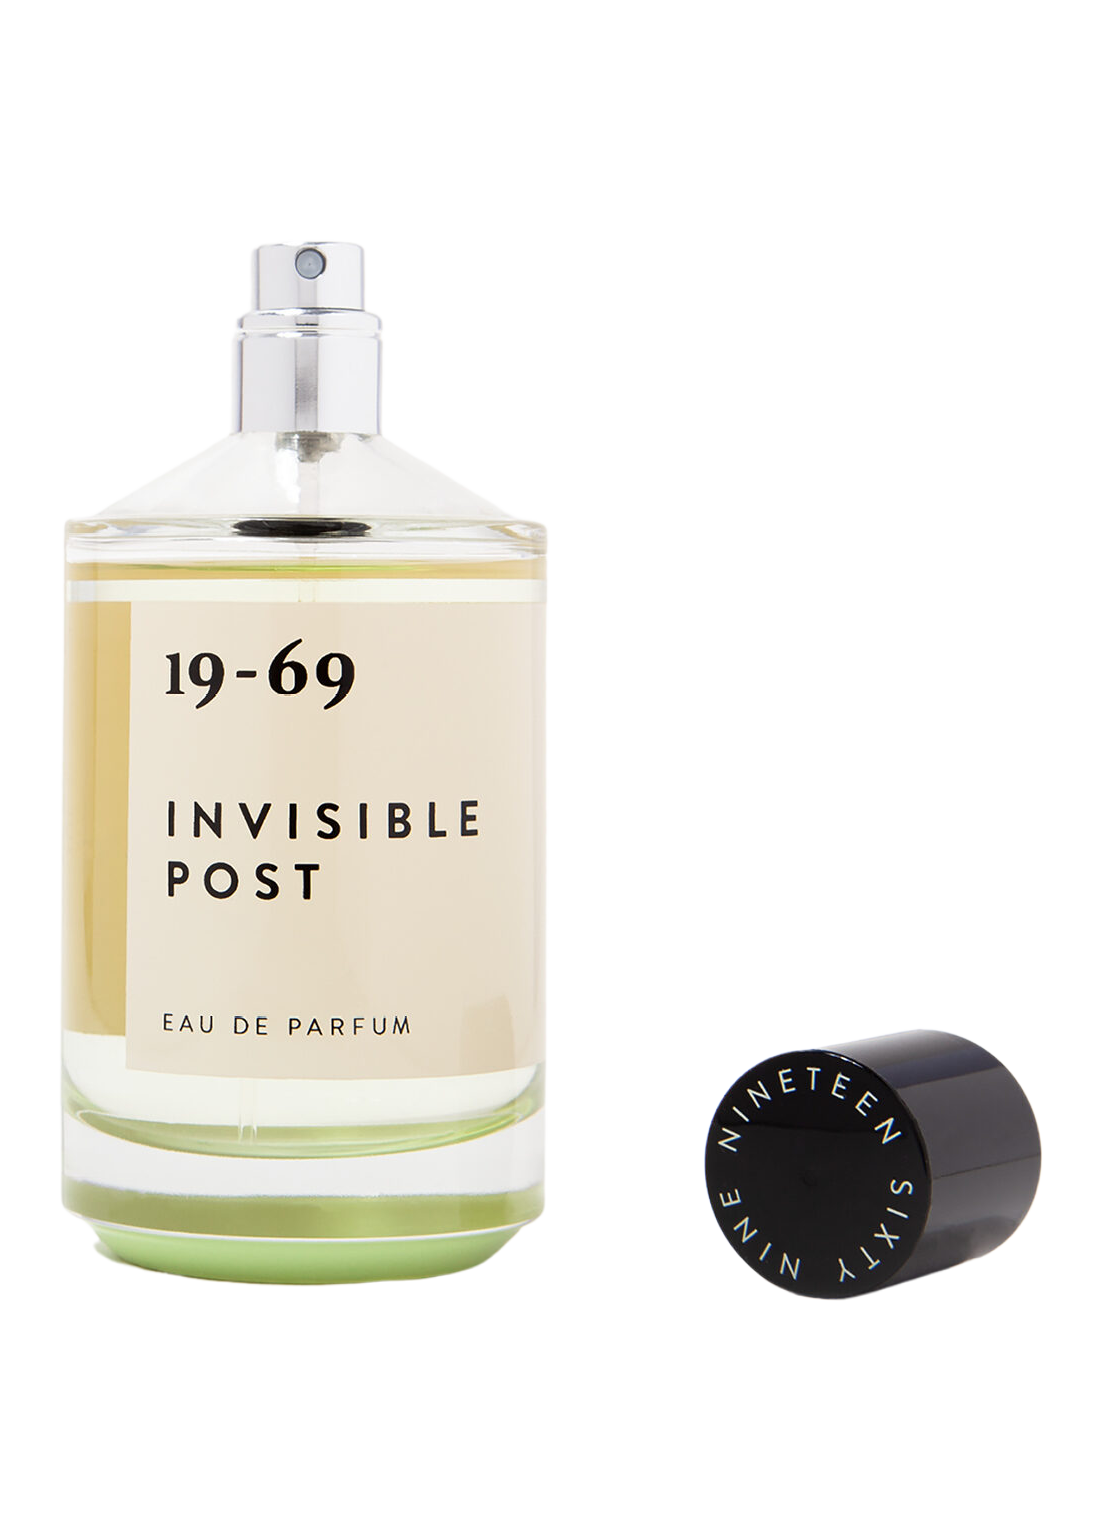 19-69 Fragrance in Invisible Post